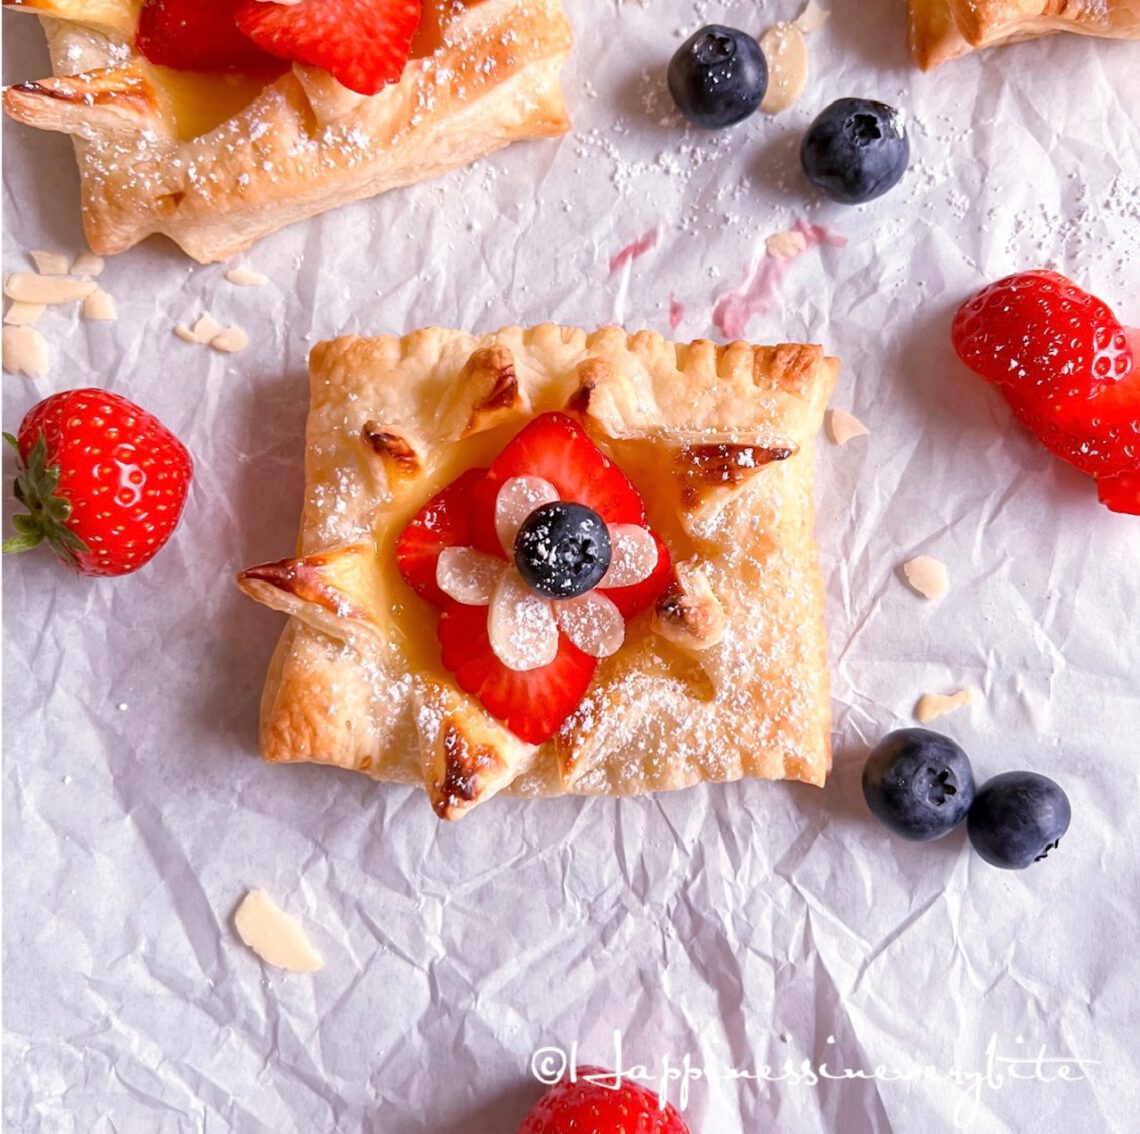 Puff pastry with vanilla pudding and strawberries